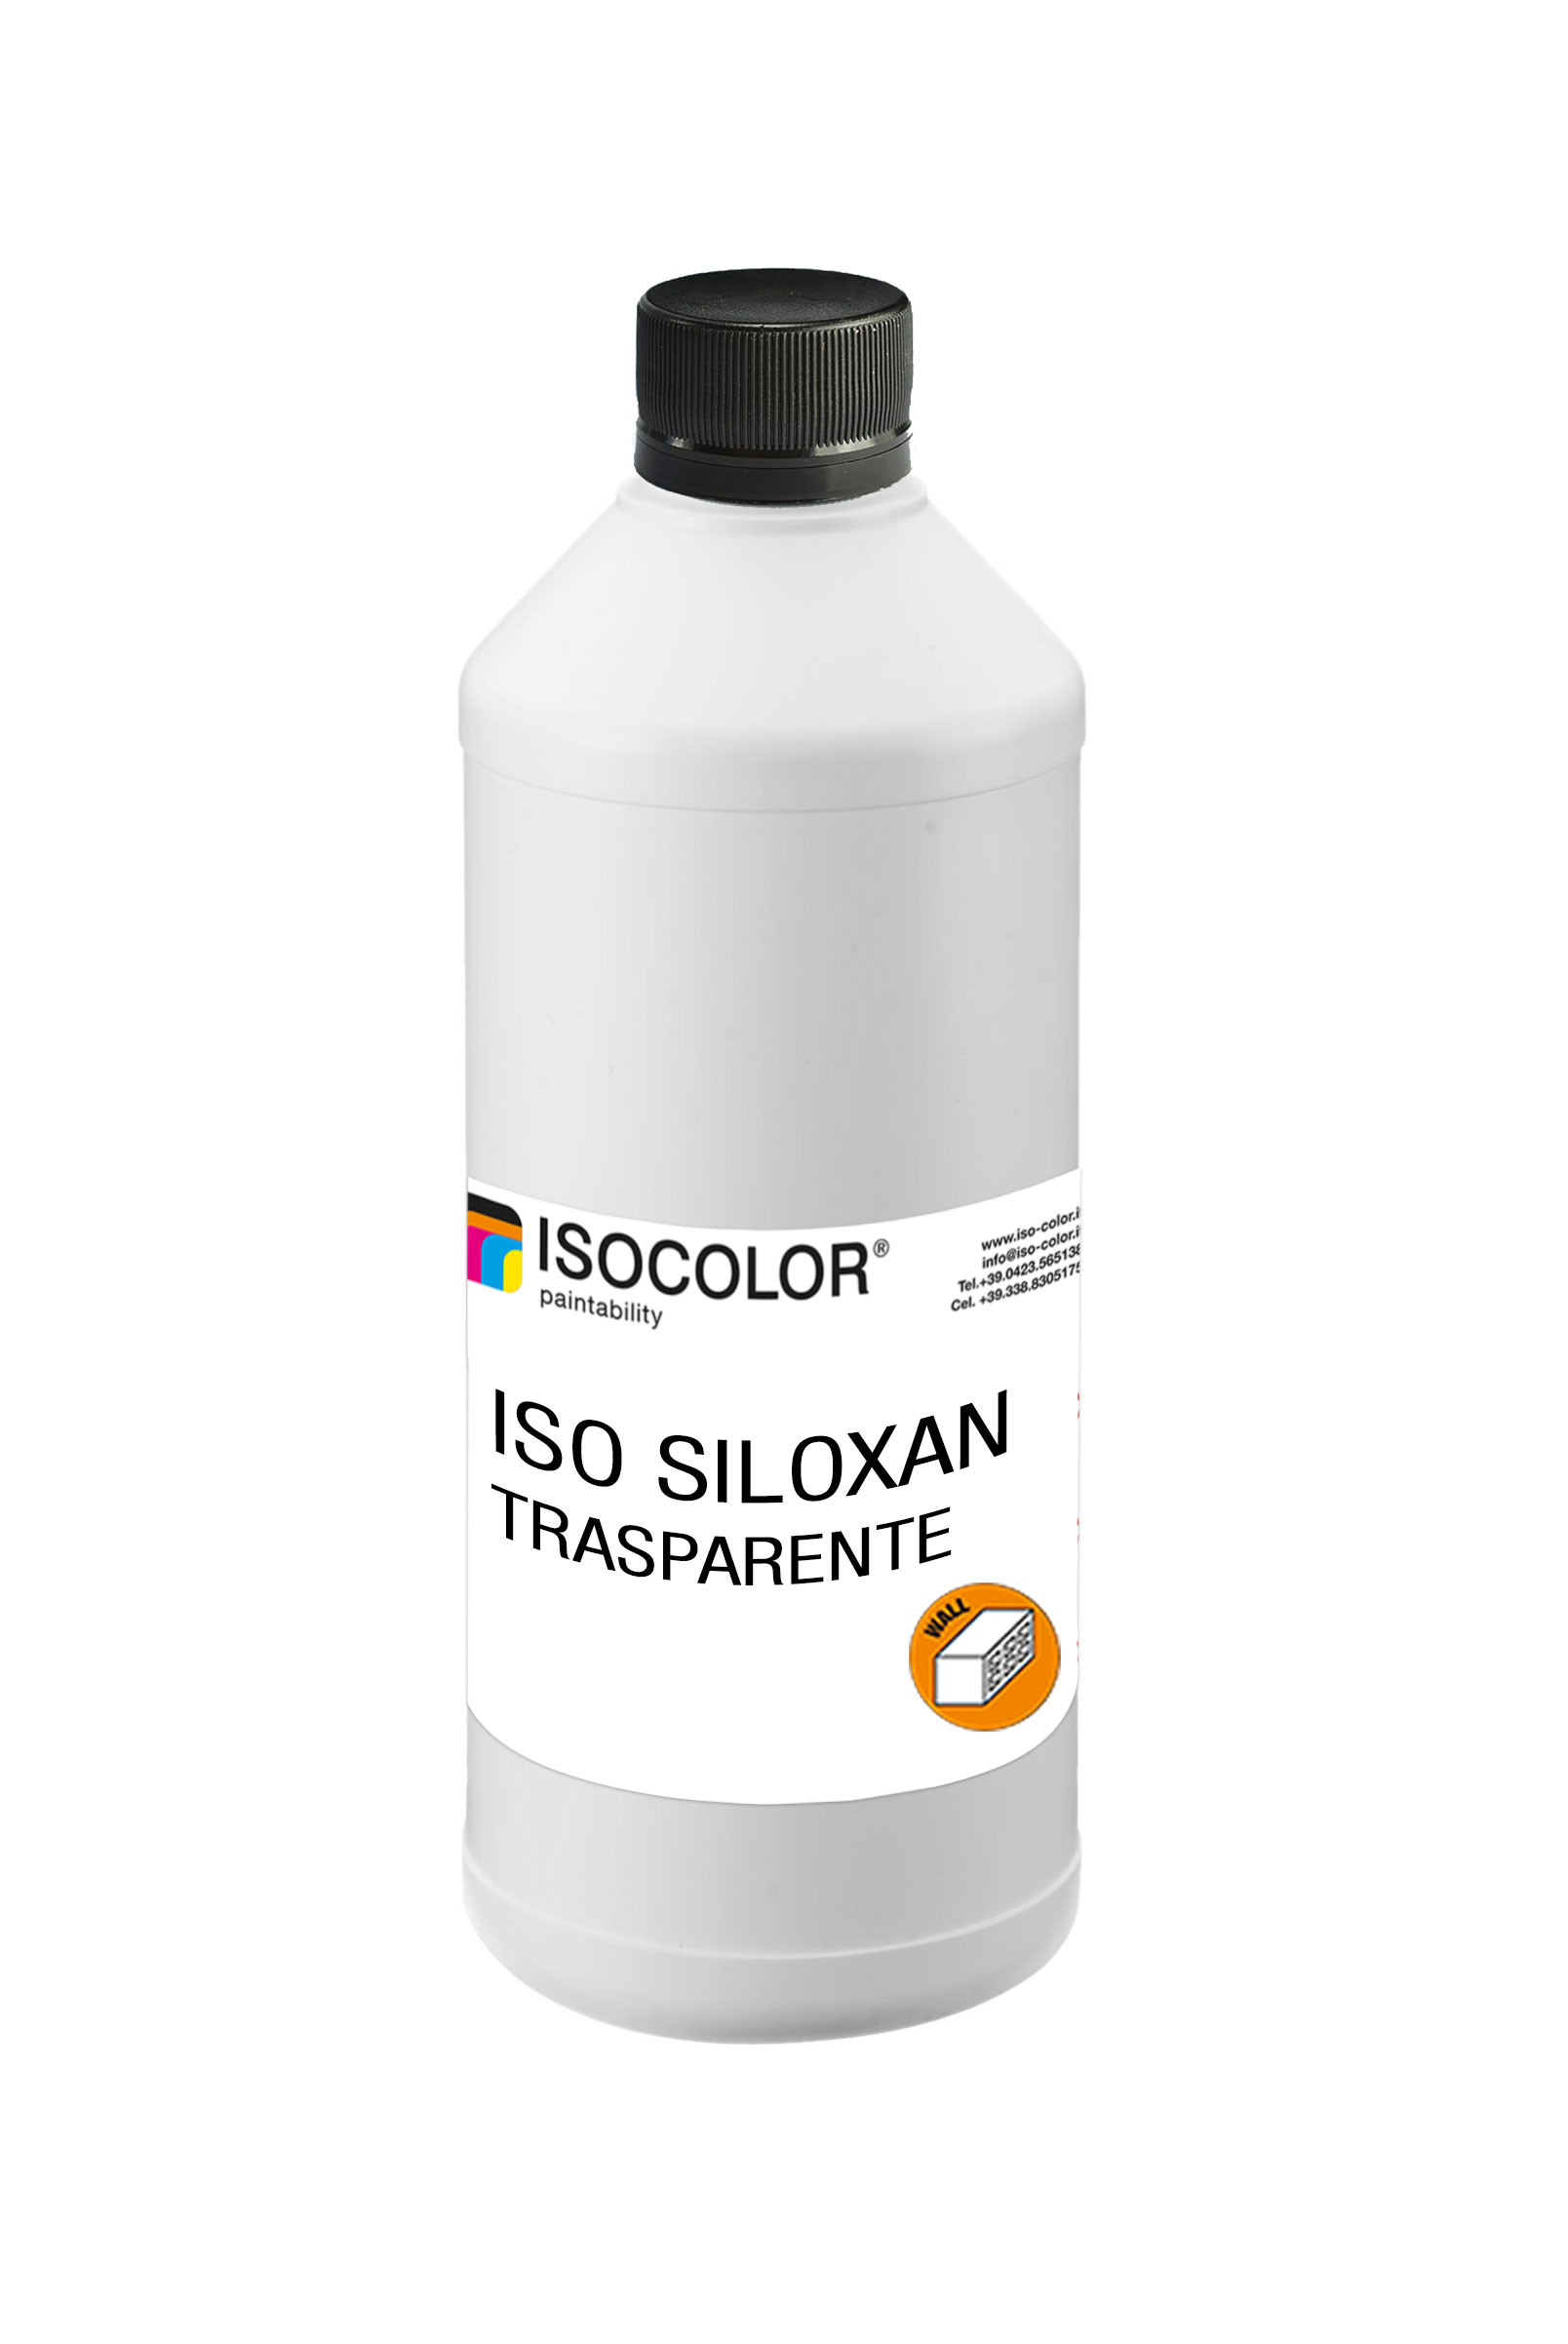 Siloxane fixative for hydrosilicone painting